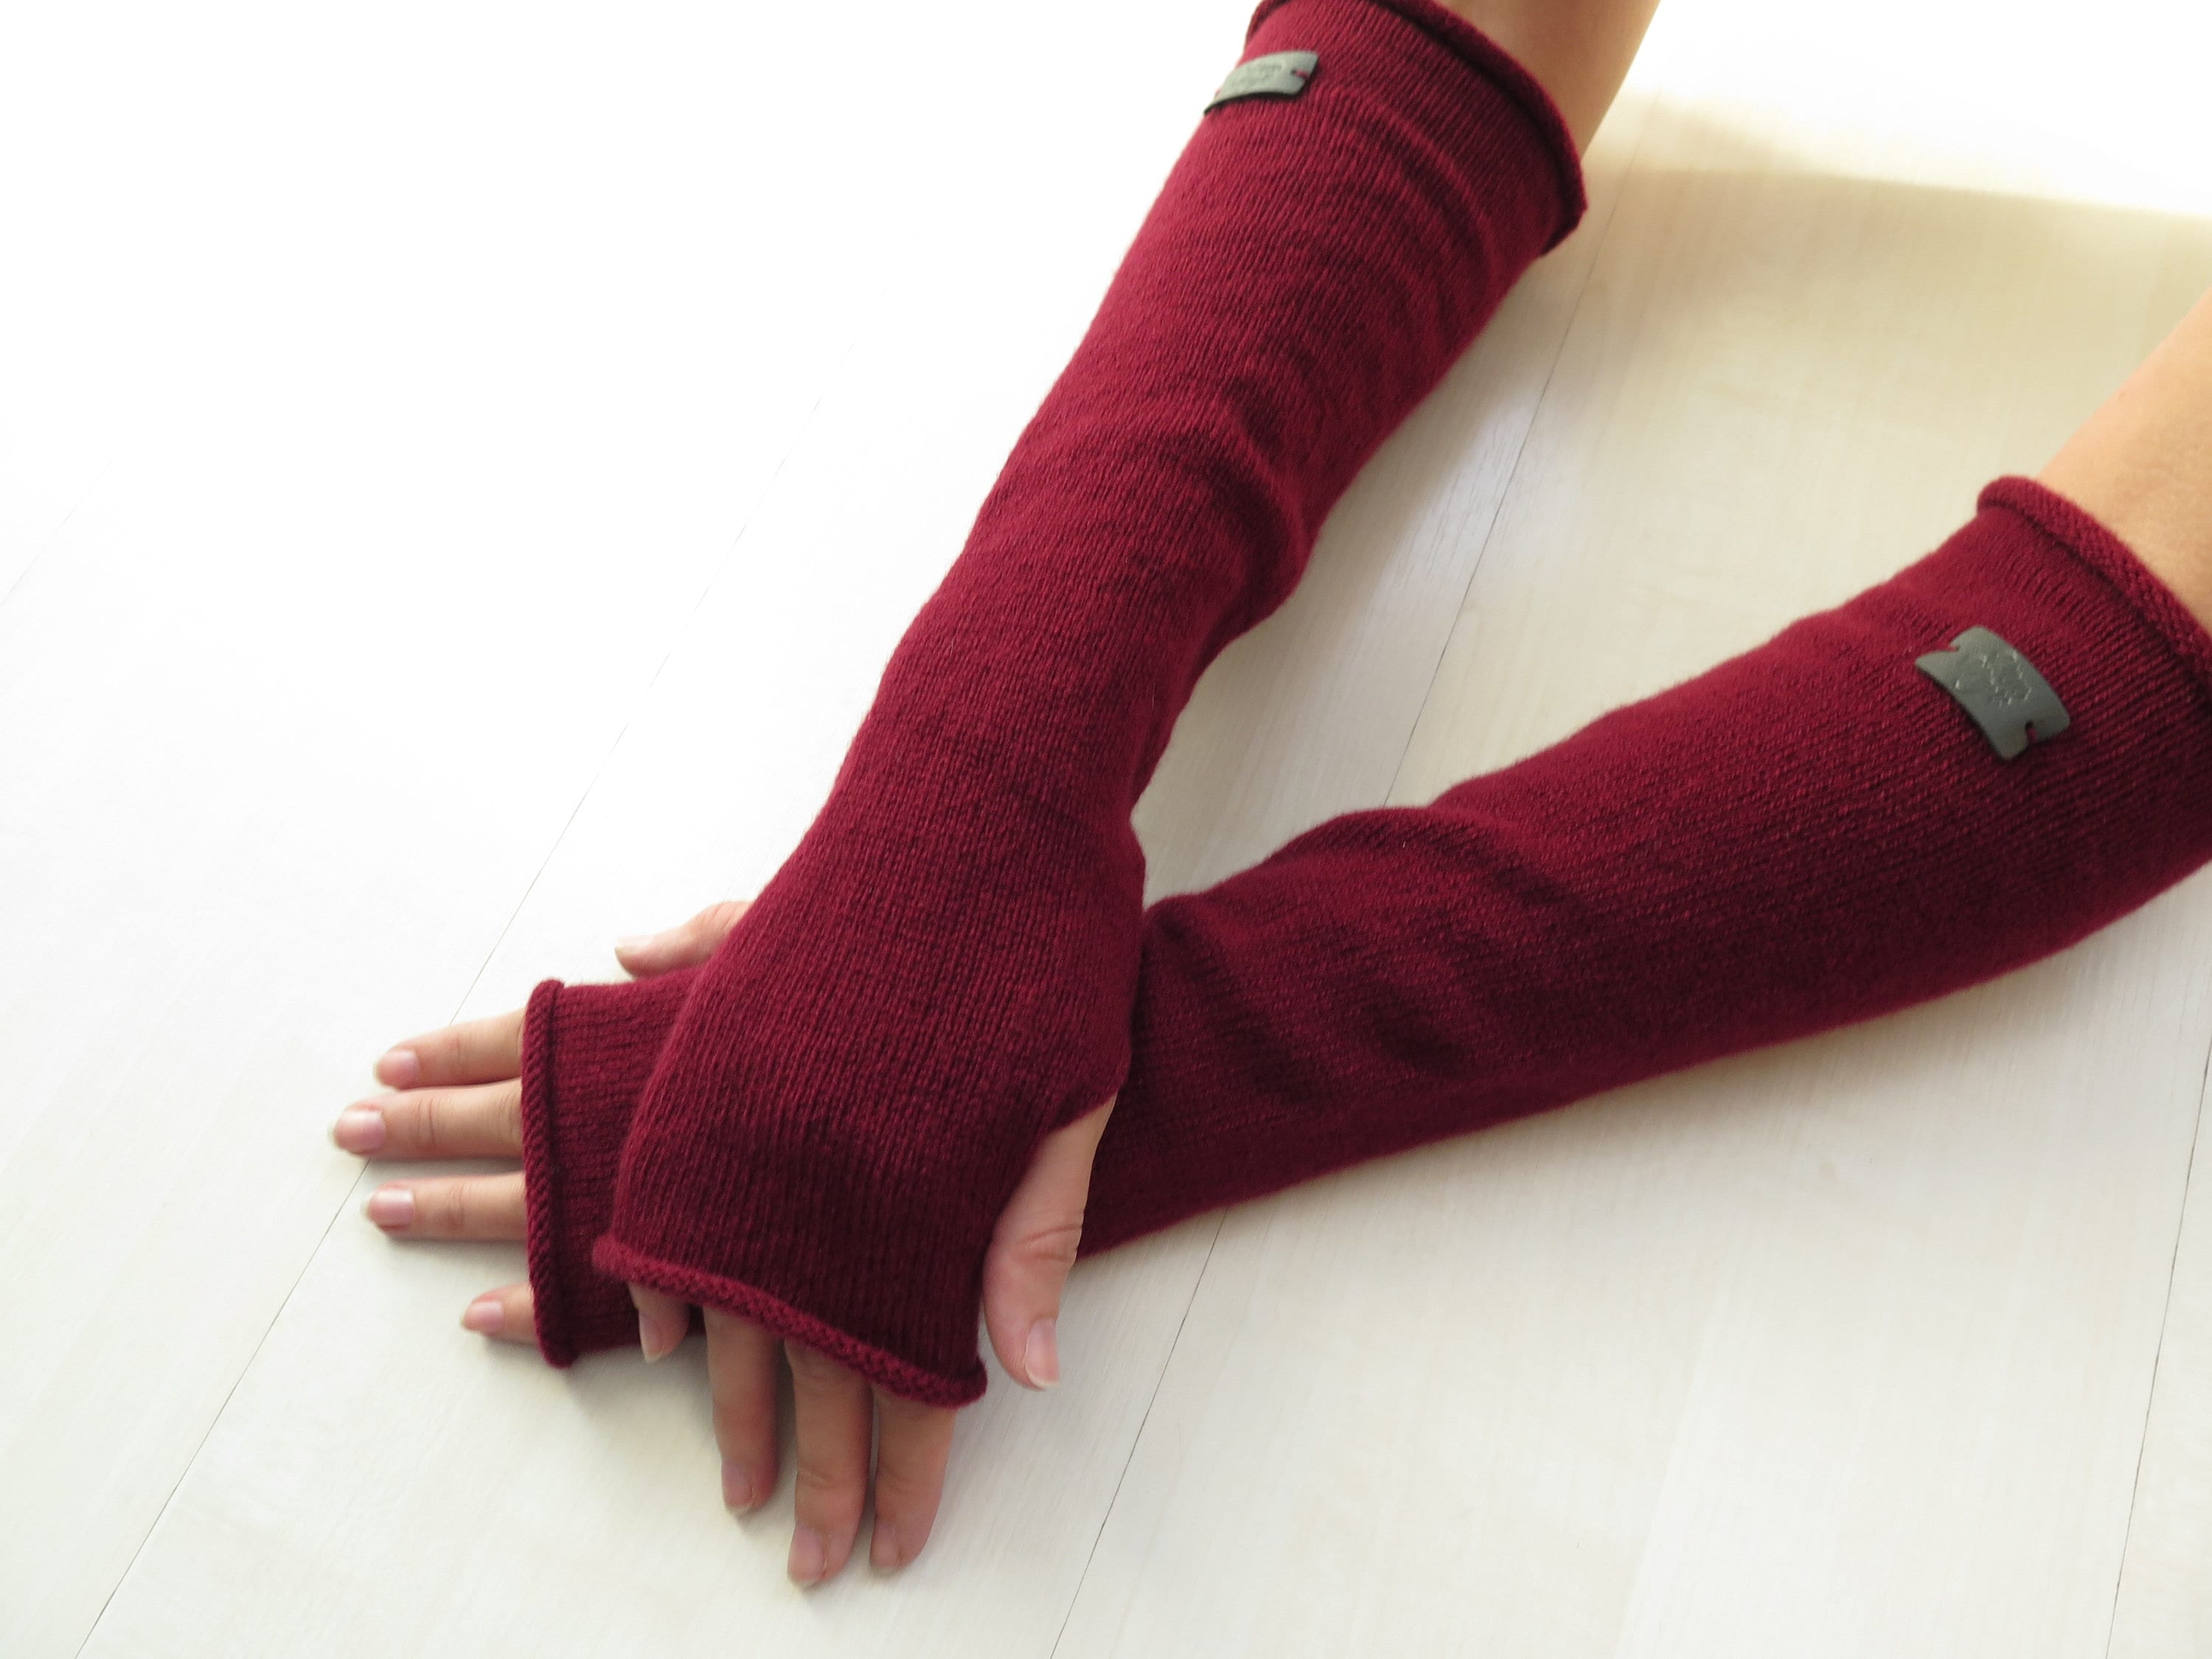 cashmere fingerless gloves  wrist warmers  driving gloves in maroon